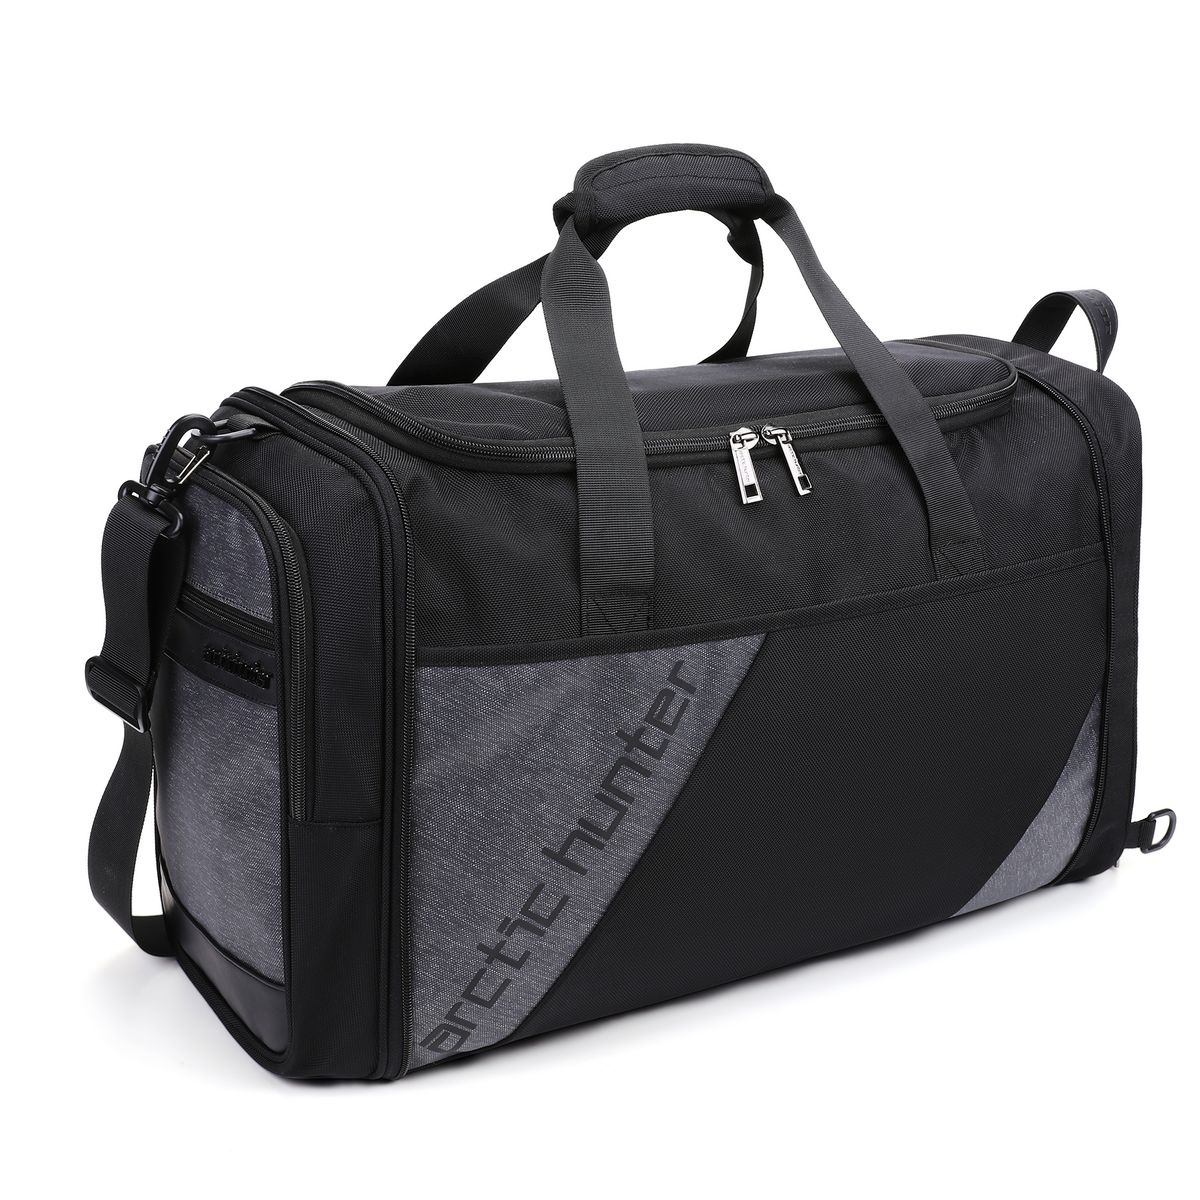 ArcticHunter Jupiter Compact Duffel Travel Bag and Duffle Sports Gym ...